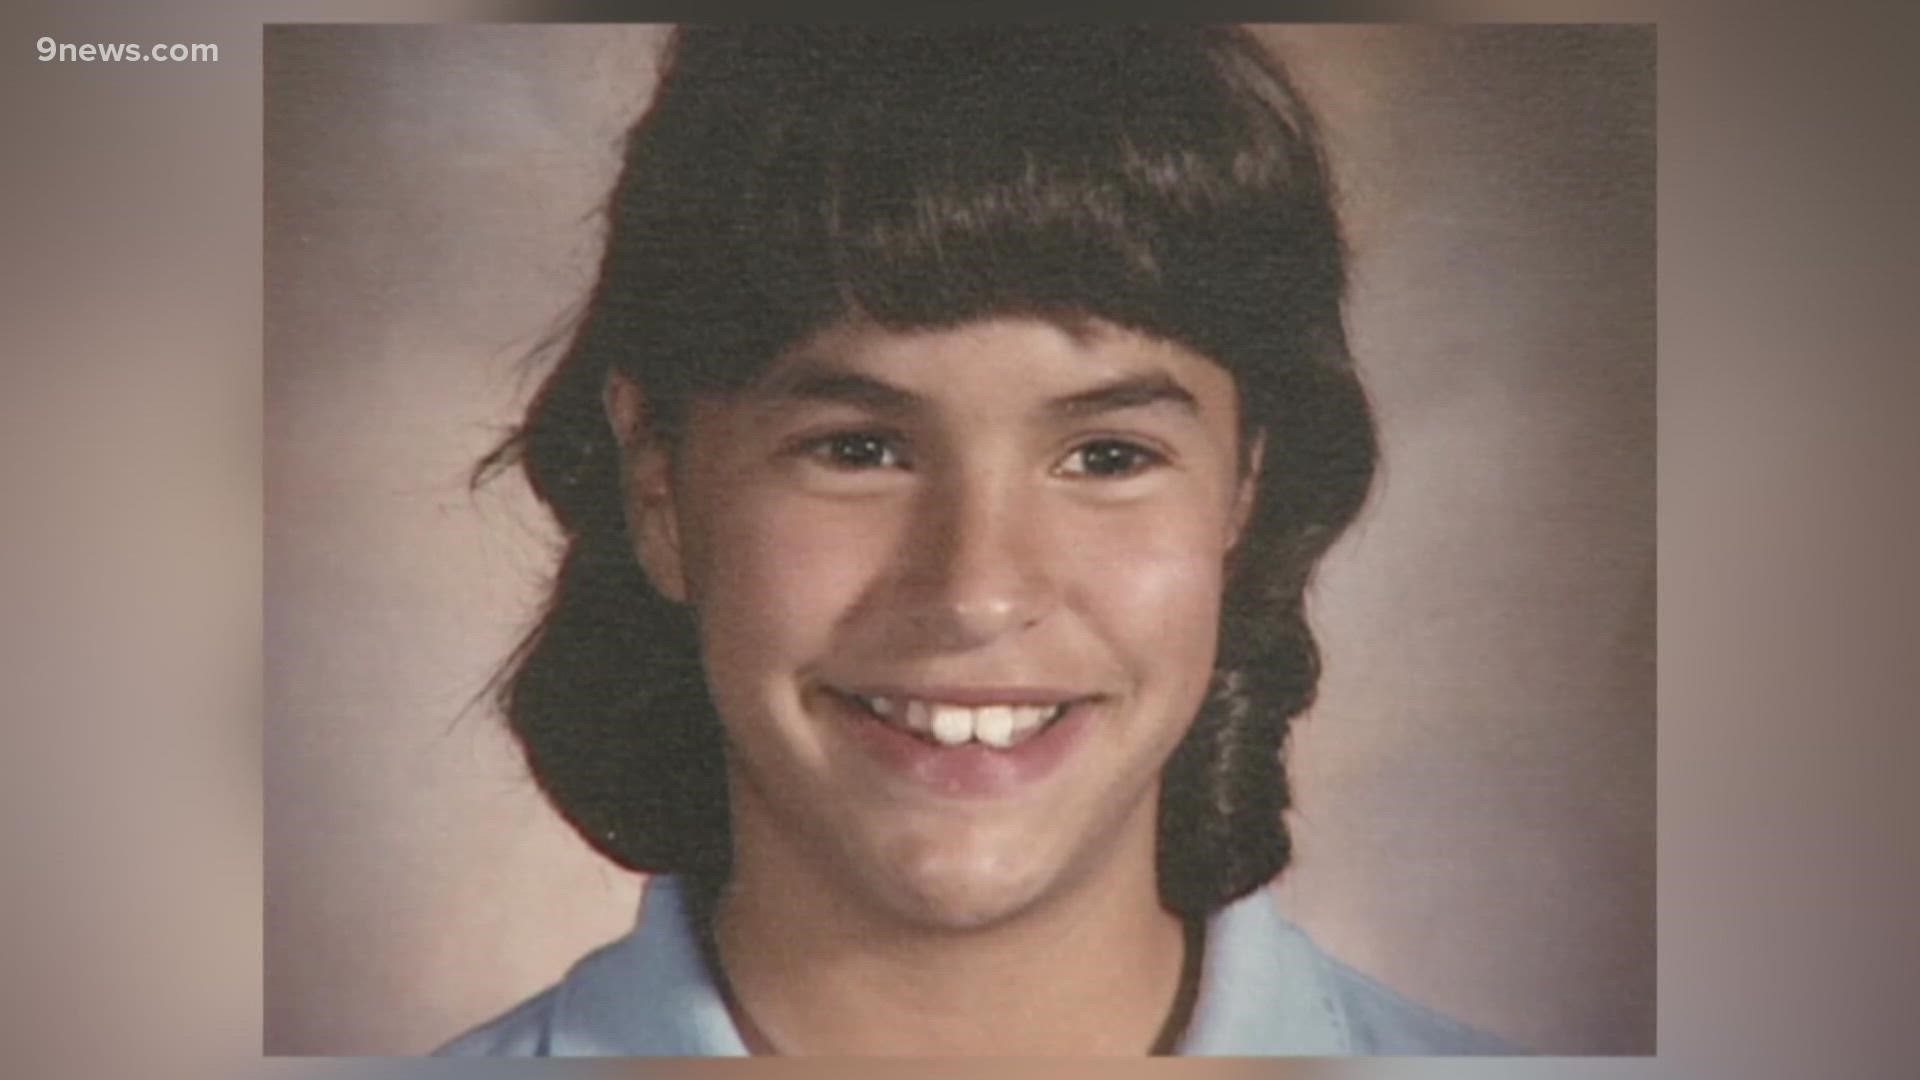 Opening statements are set for Wednesday in the trial of the man accused in the 1984 disappearance and murder of 12-year-old Jonelle Matthews.